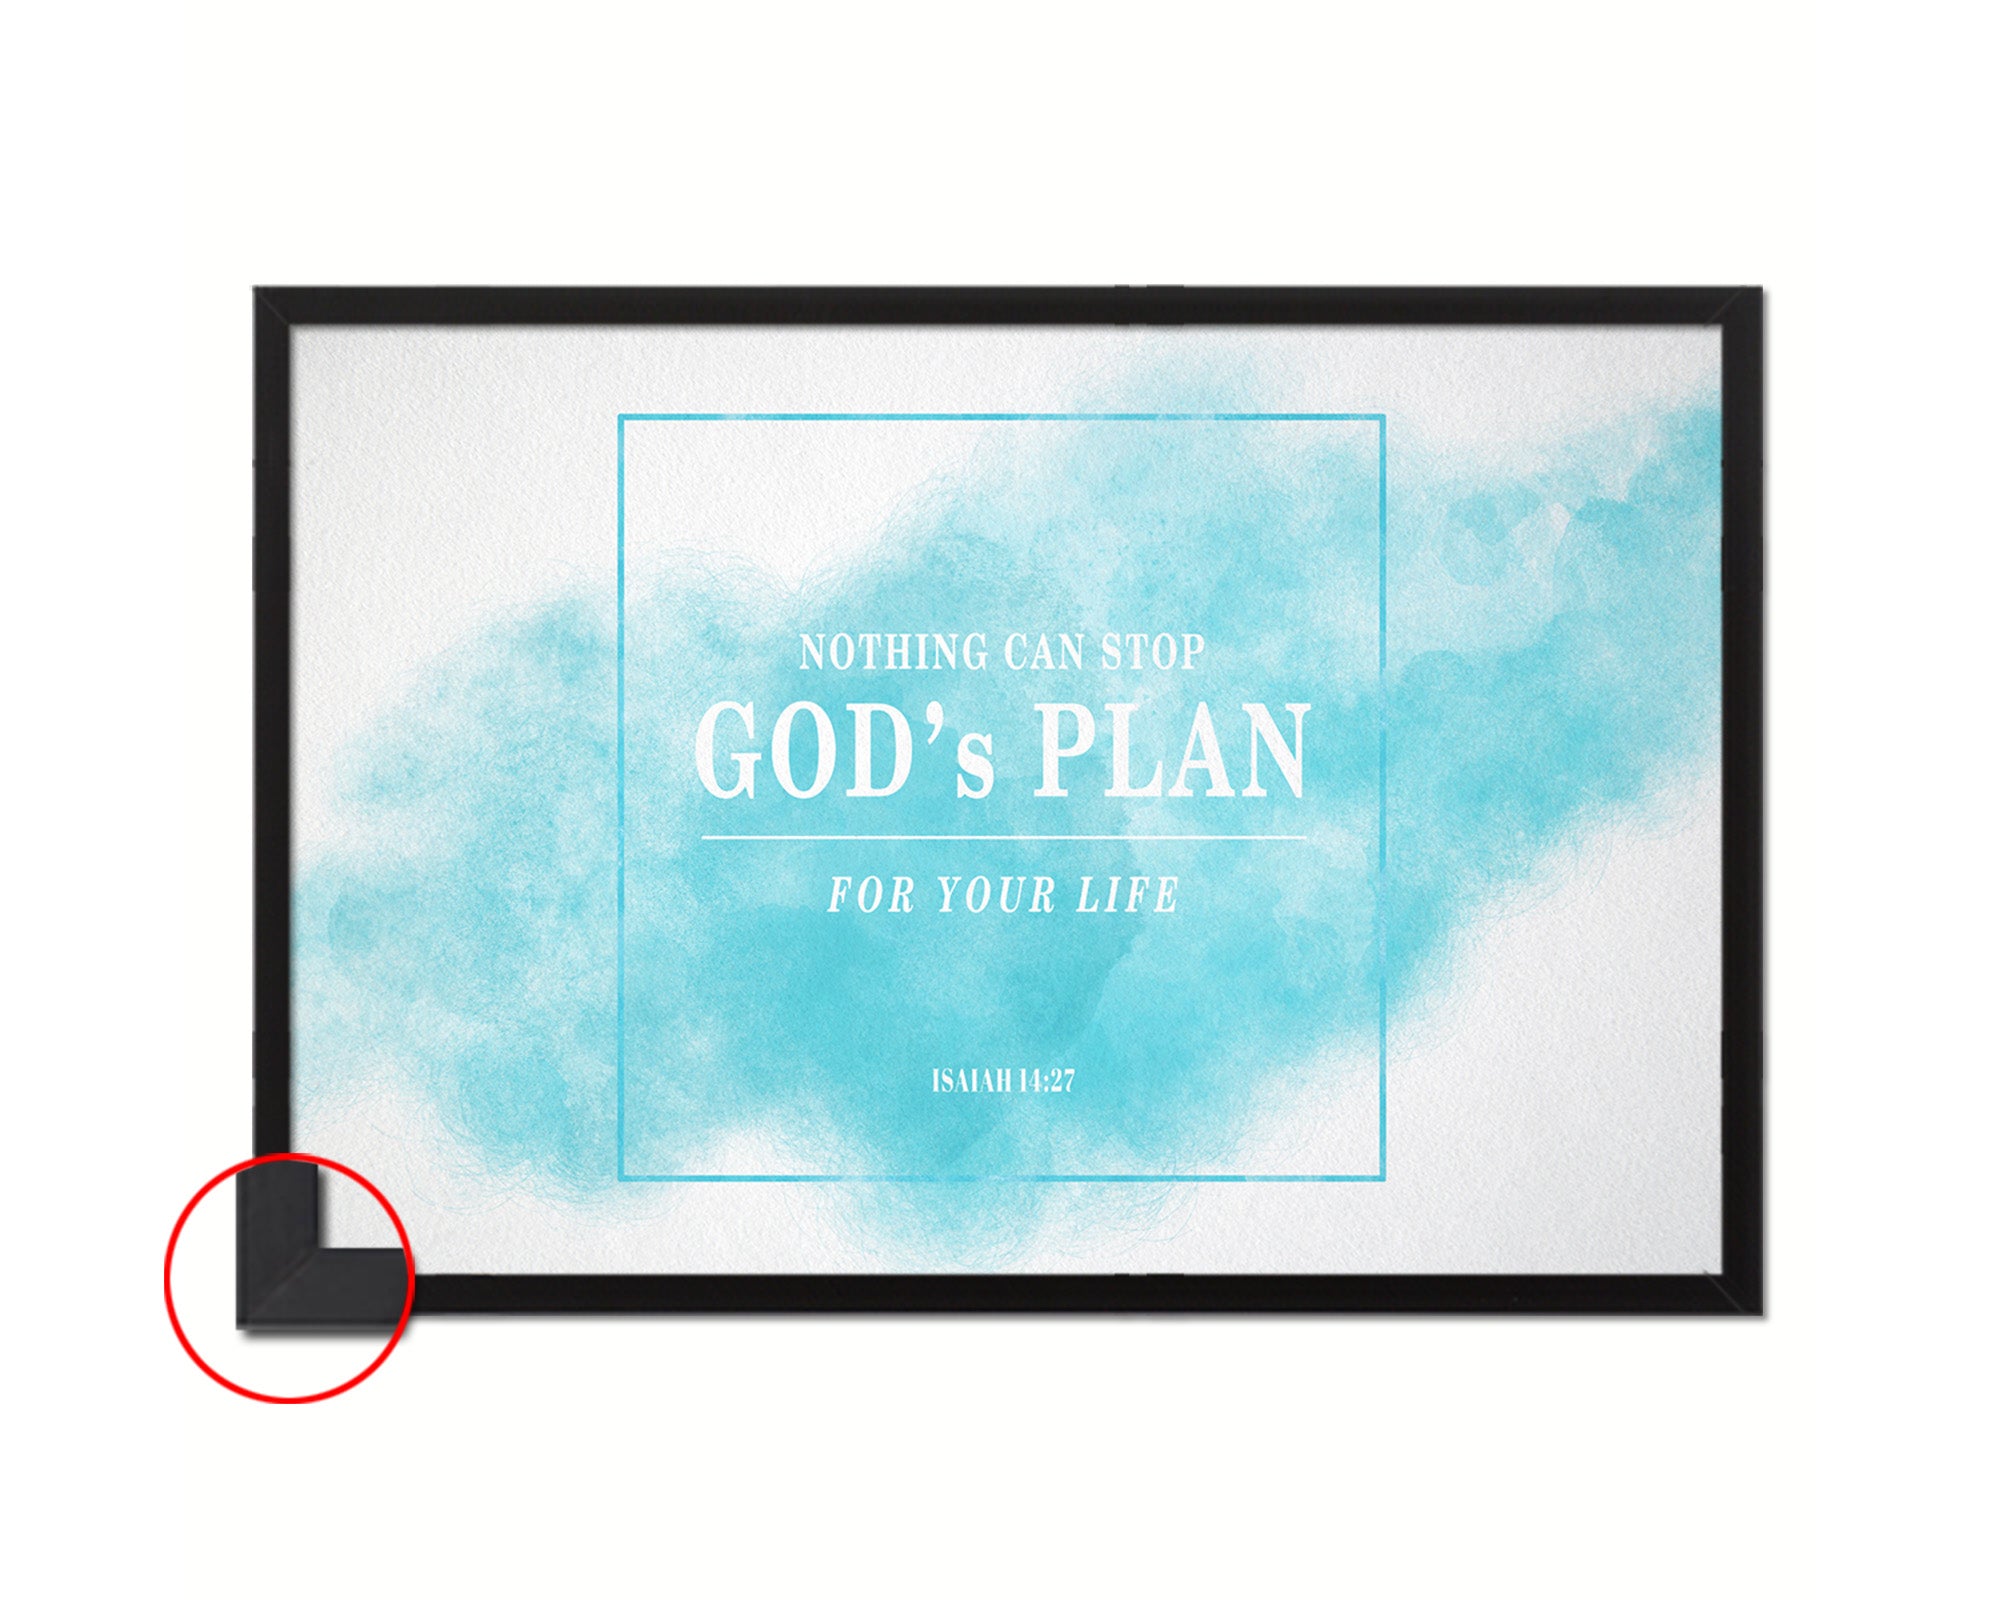 Nothing can stop God's plan for your life, Isaiah 14:27 46096 Framed Print Wall Decor Art Gifts